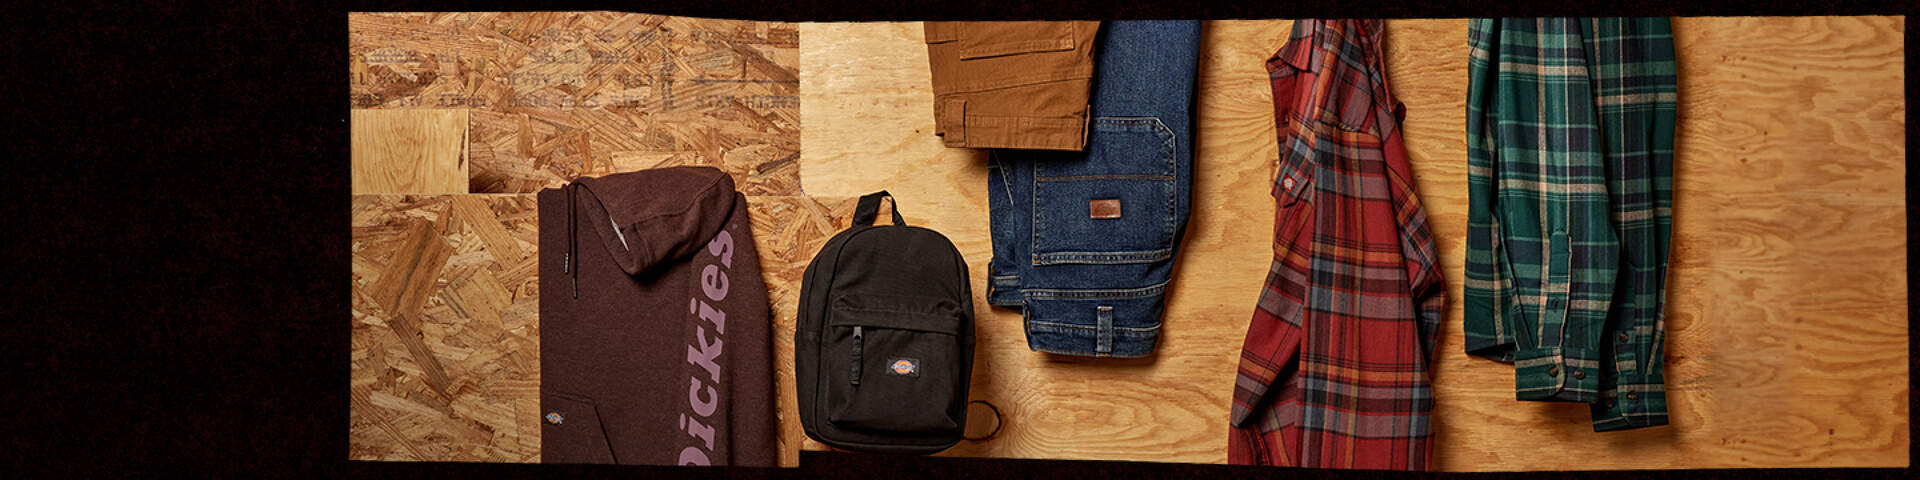 flannel shirts, jeans, back pack and hoodie